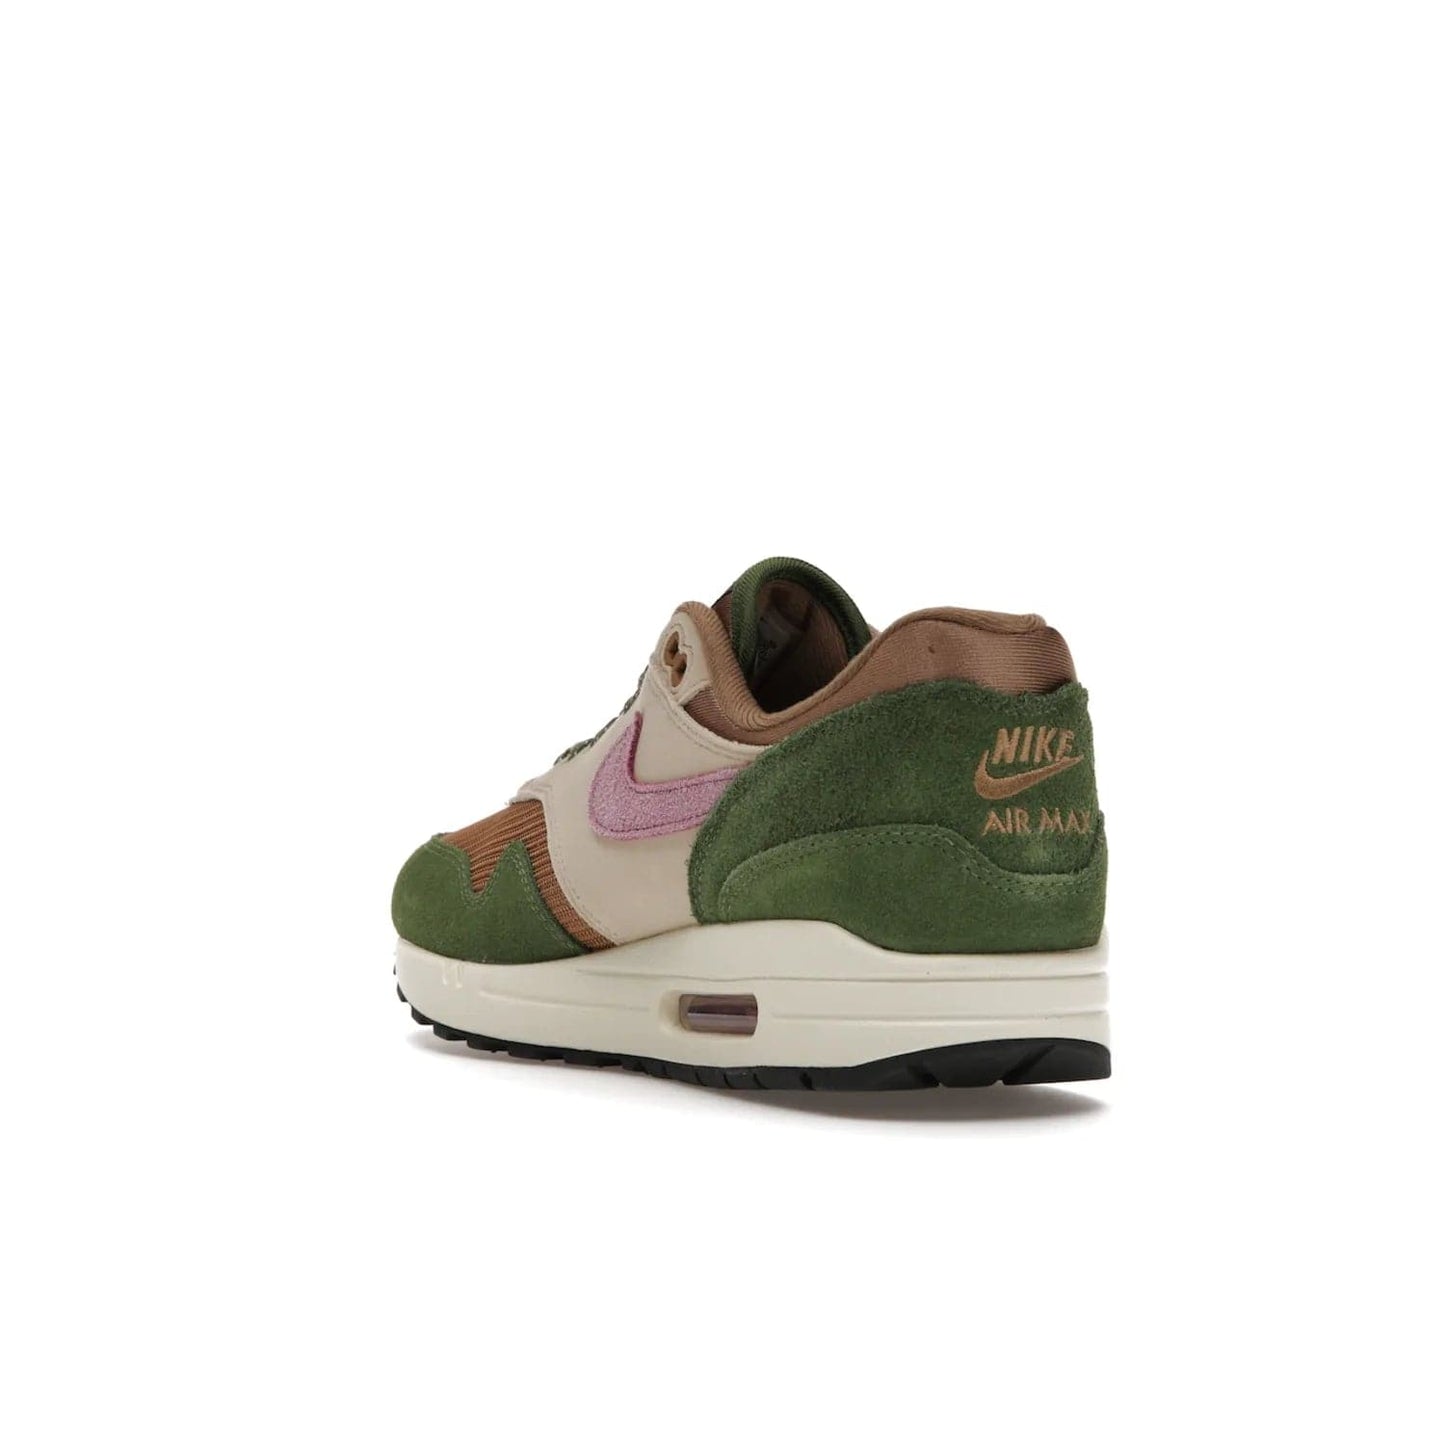 Nike Air Max 1 SH Treeline - Image 25 - Only at www.BallersClubKickz.com - A classic Nike Air Max 1 SH Treeline with a brown mesh upper, taupe Durabuck overlays, and hairy green suede details. Light Bordeaux Swoosh and woven tongue label for a pop of color. Released in May 2022. Perfect for any outfit and sure to impress.